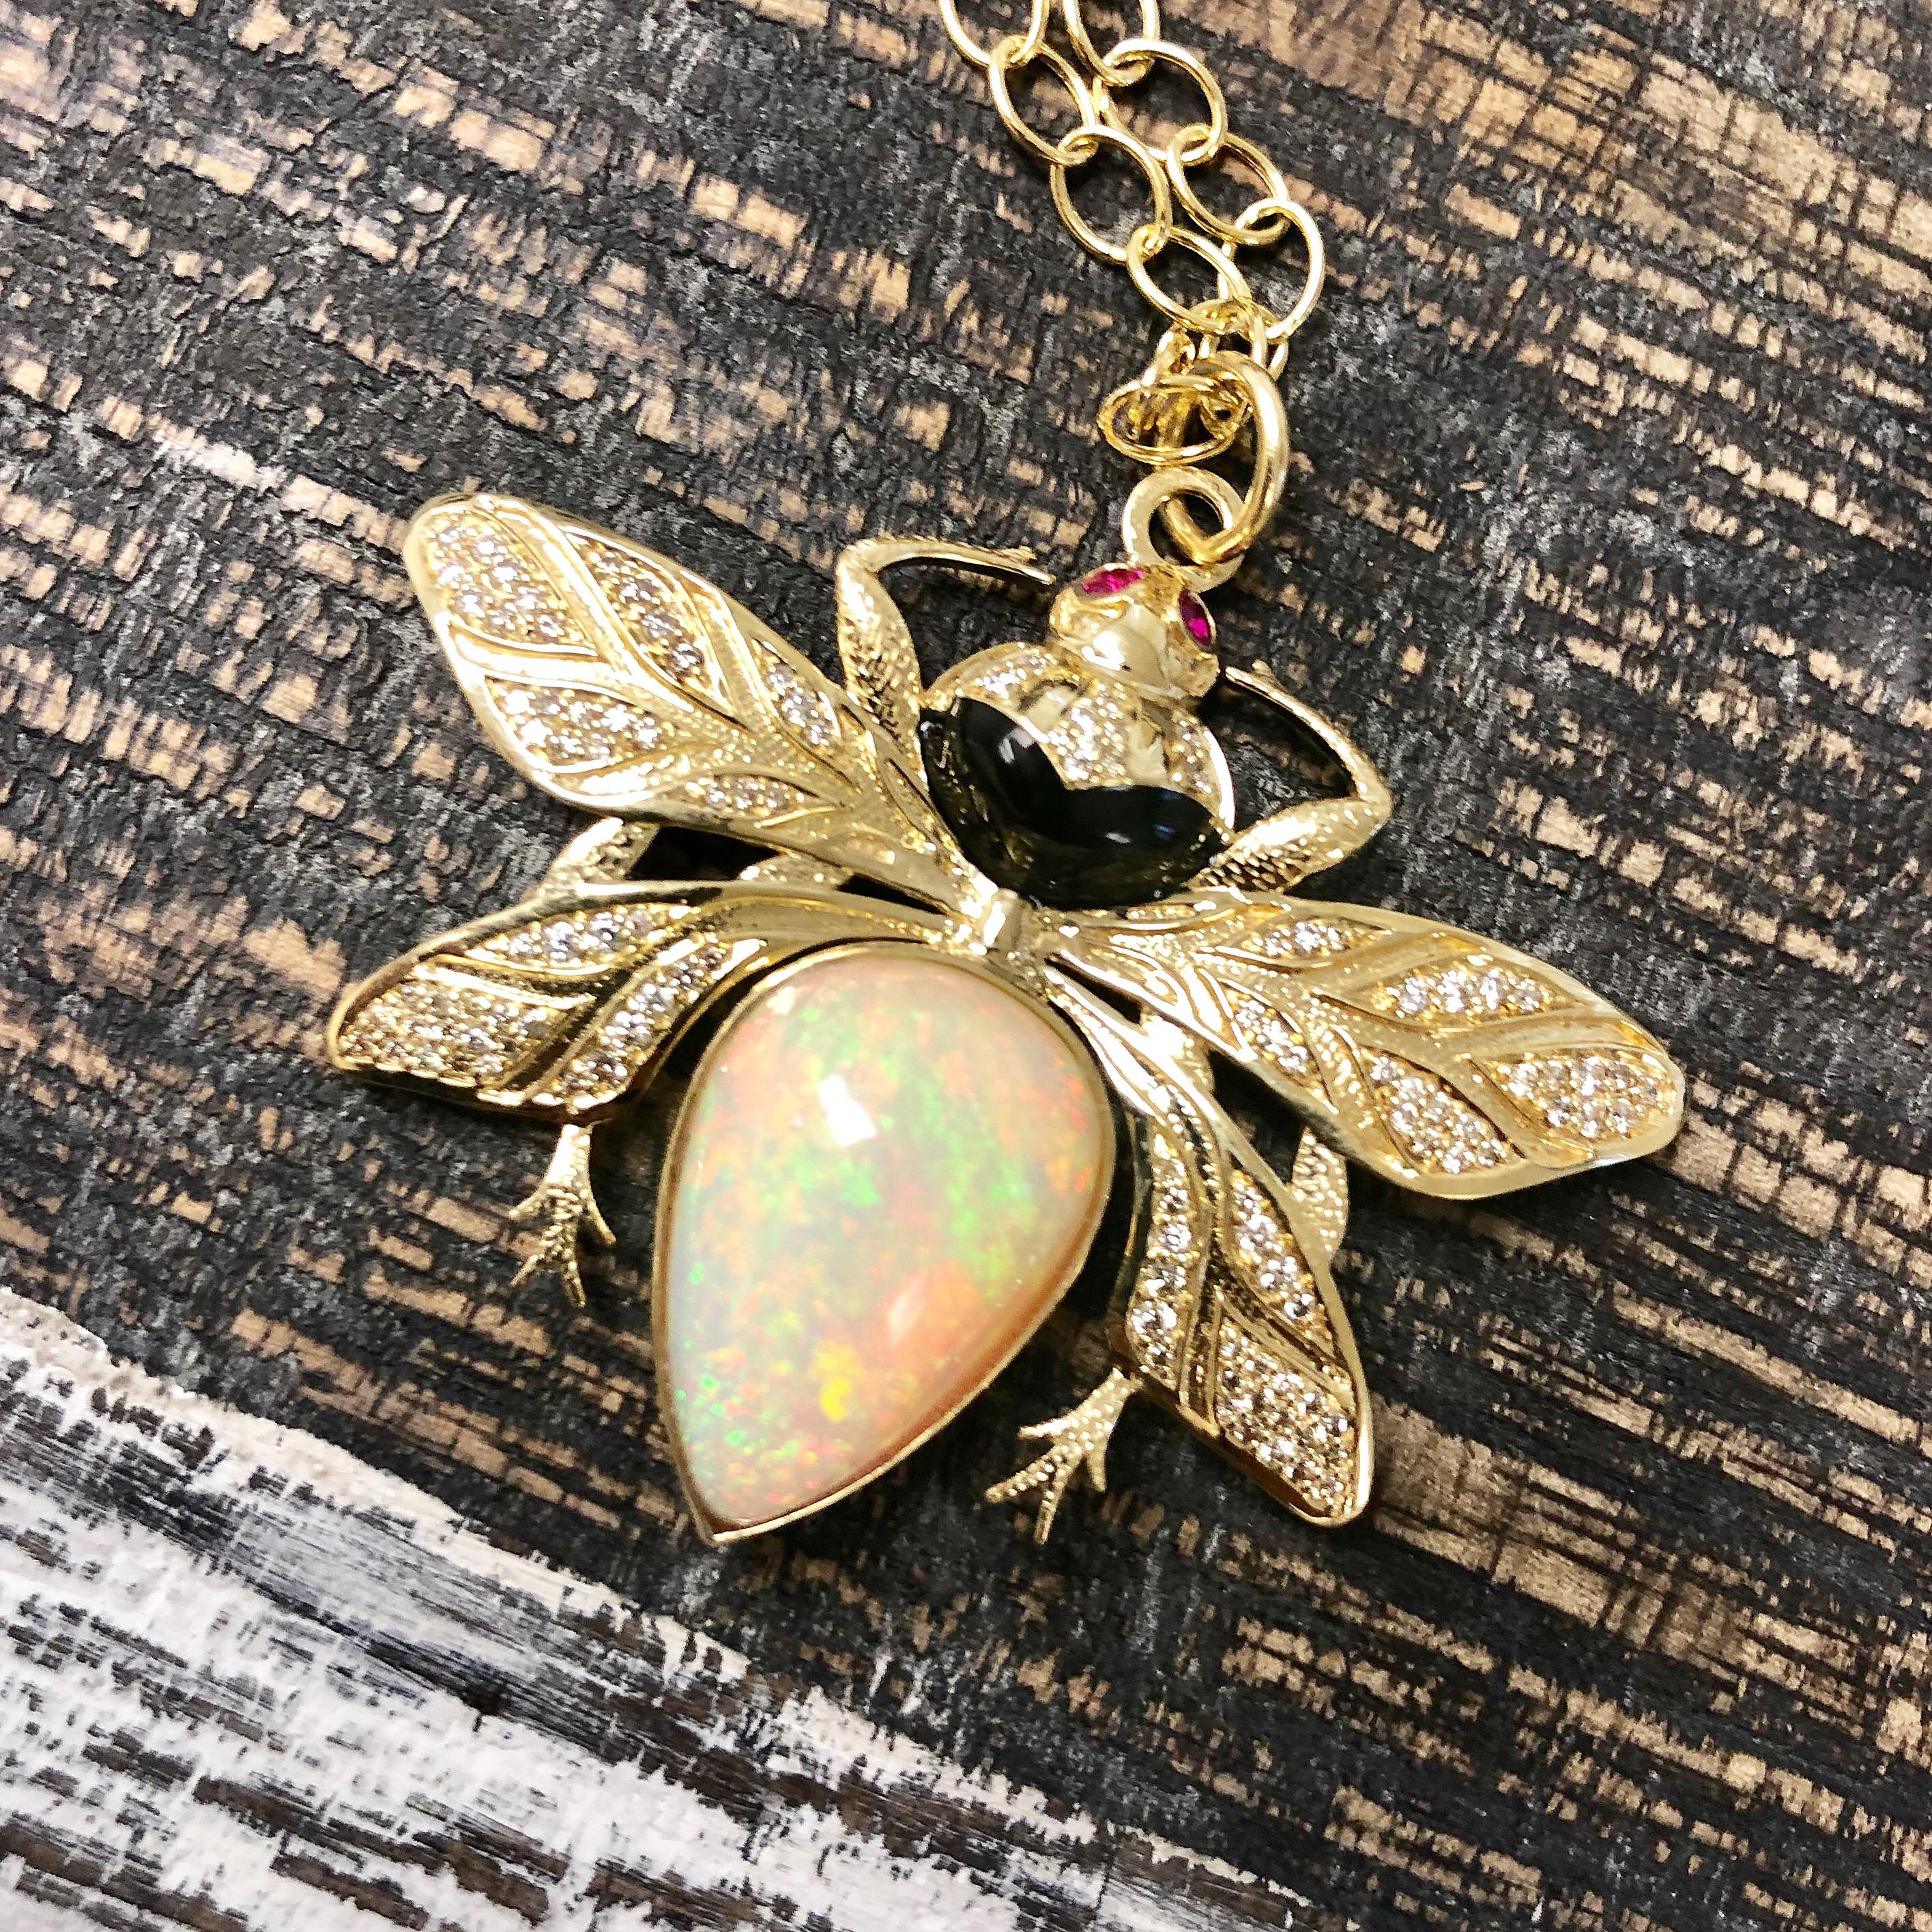 Created in 18 karat yellow gold 
One of a kind gorgeous Ethiopian opal 10 cts approx
Bright diamonds 0.50 ct approx
High intensity ruby cabochon eyes 0.10 ct approx
Intricate diamond setting in gold wings & feelers
Black enamel body details
One of a